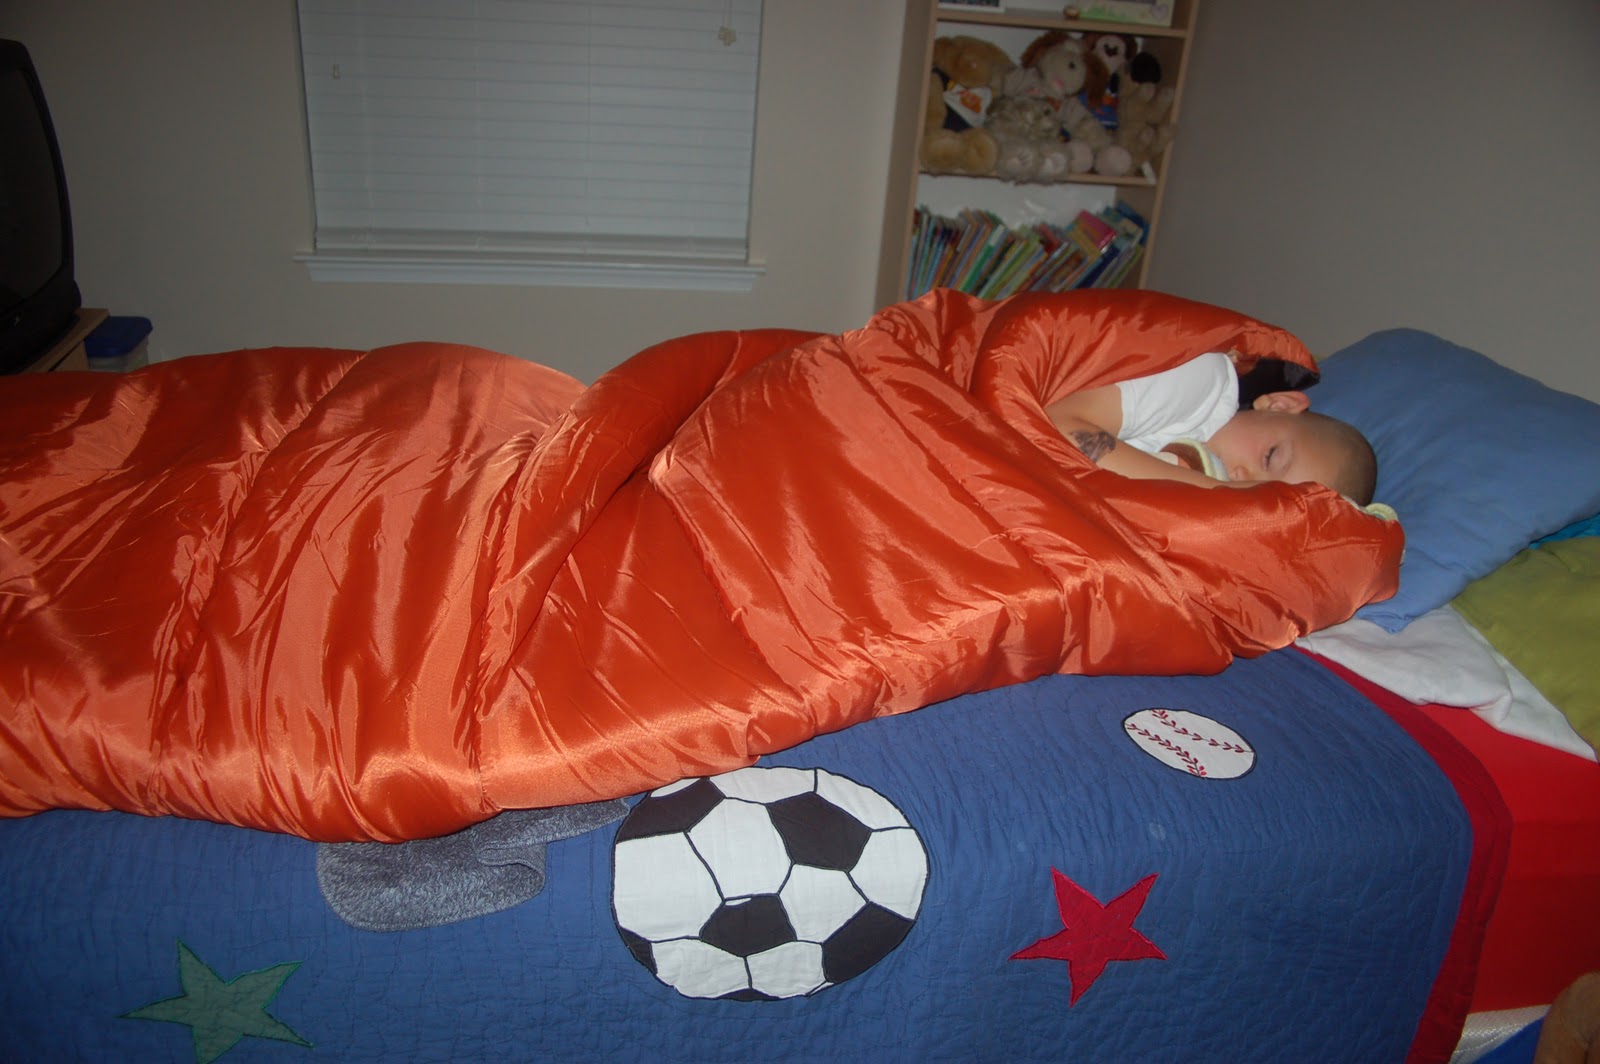 Indoor Camping in the living room -- fun idea for bad weather